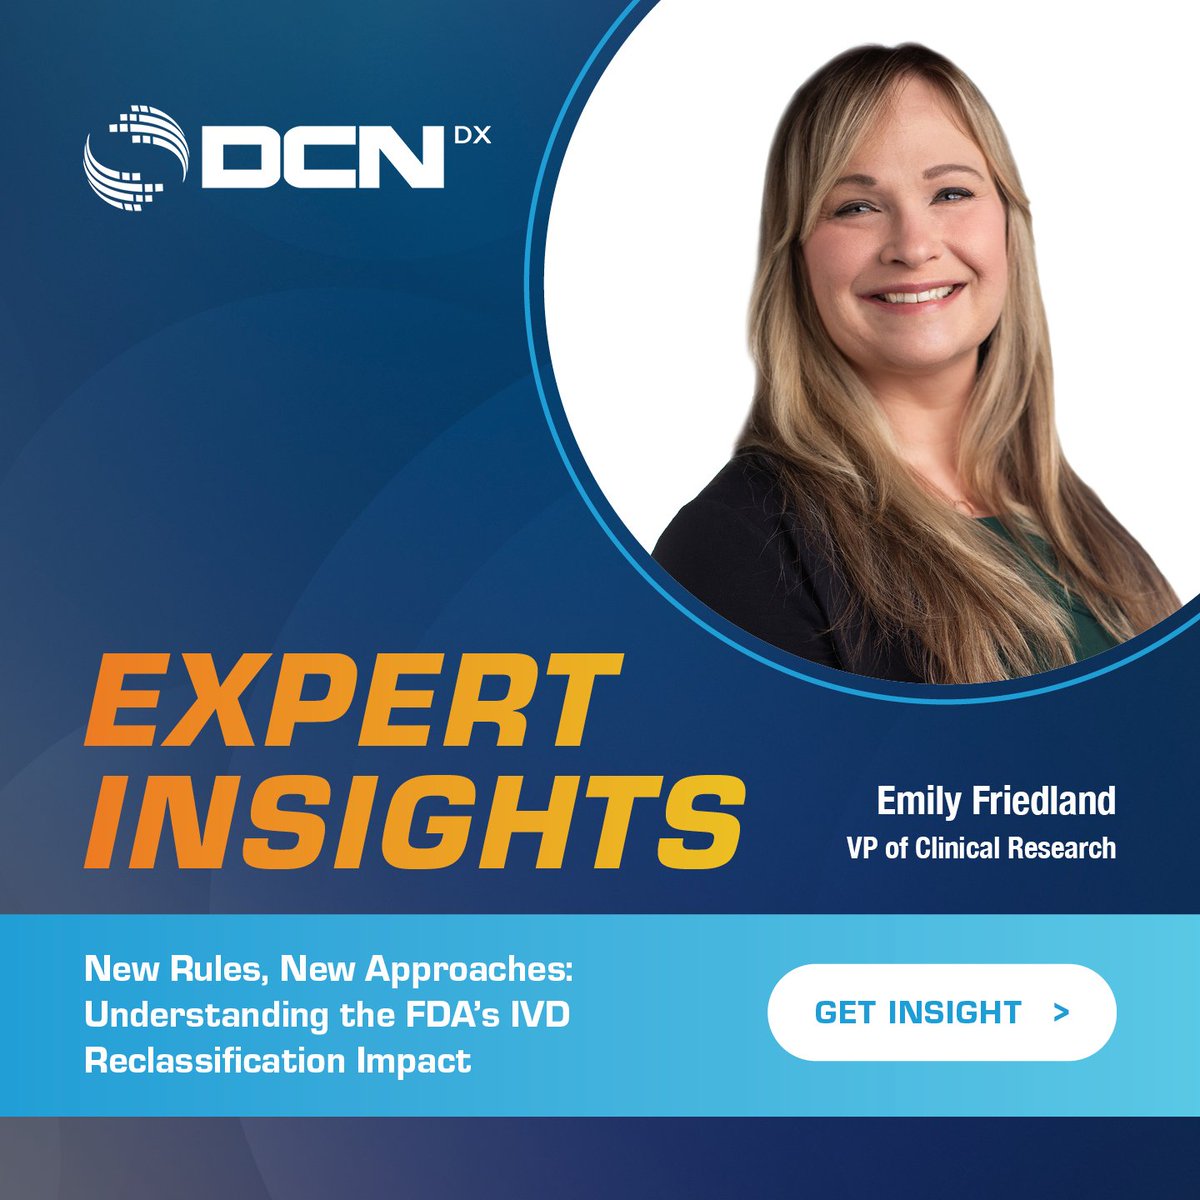 🦠 In our recent #ExpertInsights article, our VP of Clinical Research delves into the FDA's recent decision to reclassify certain #infectiousdisease #IVDs from Class III to Class II. 
hubs.ly/Q02ryqNq0

#DCNDx #FDA #Regulatory #ClinicalStudies #Diagnostics